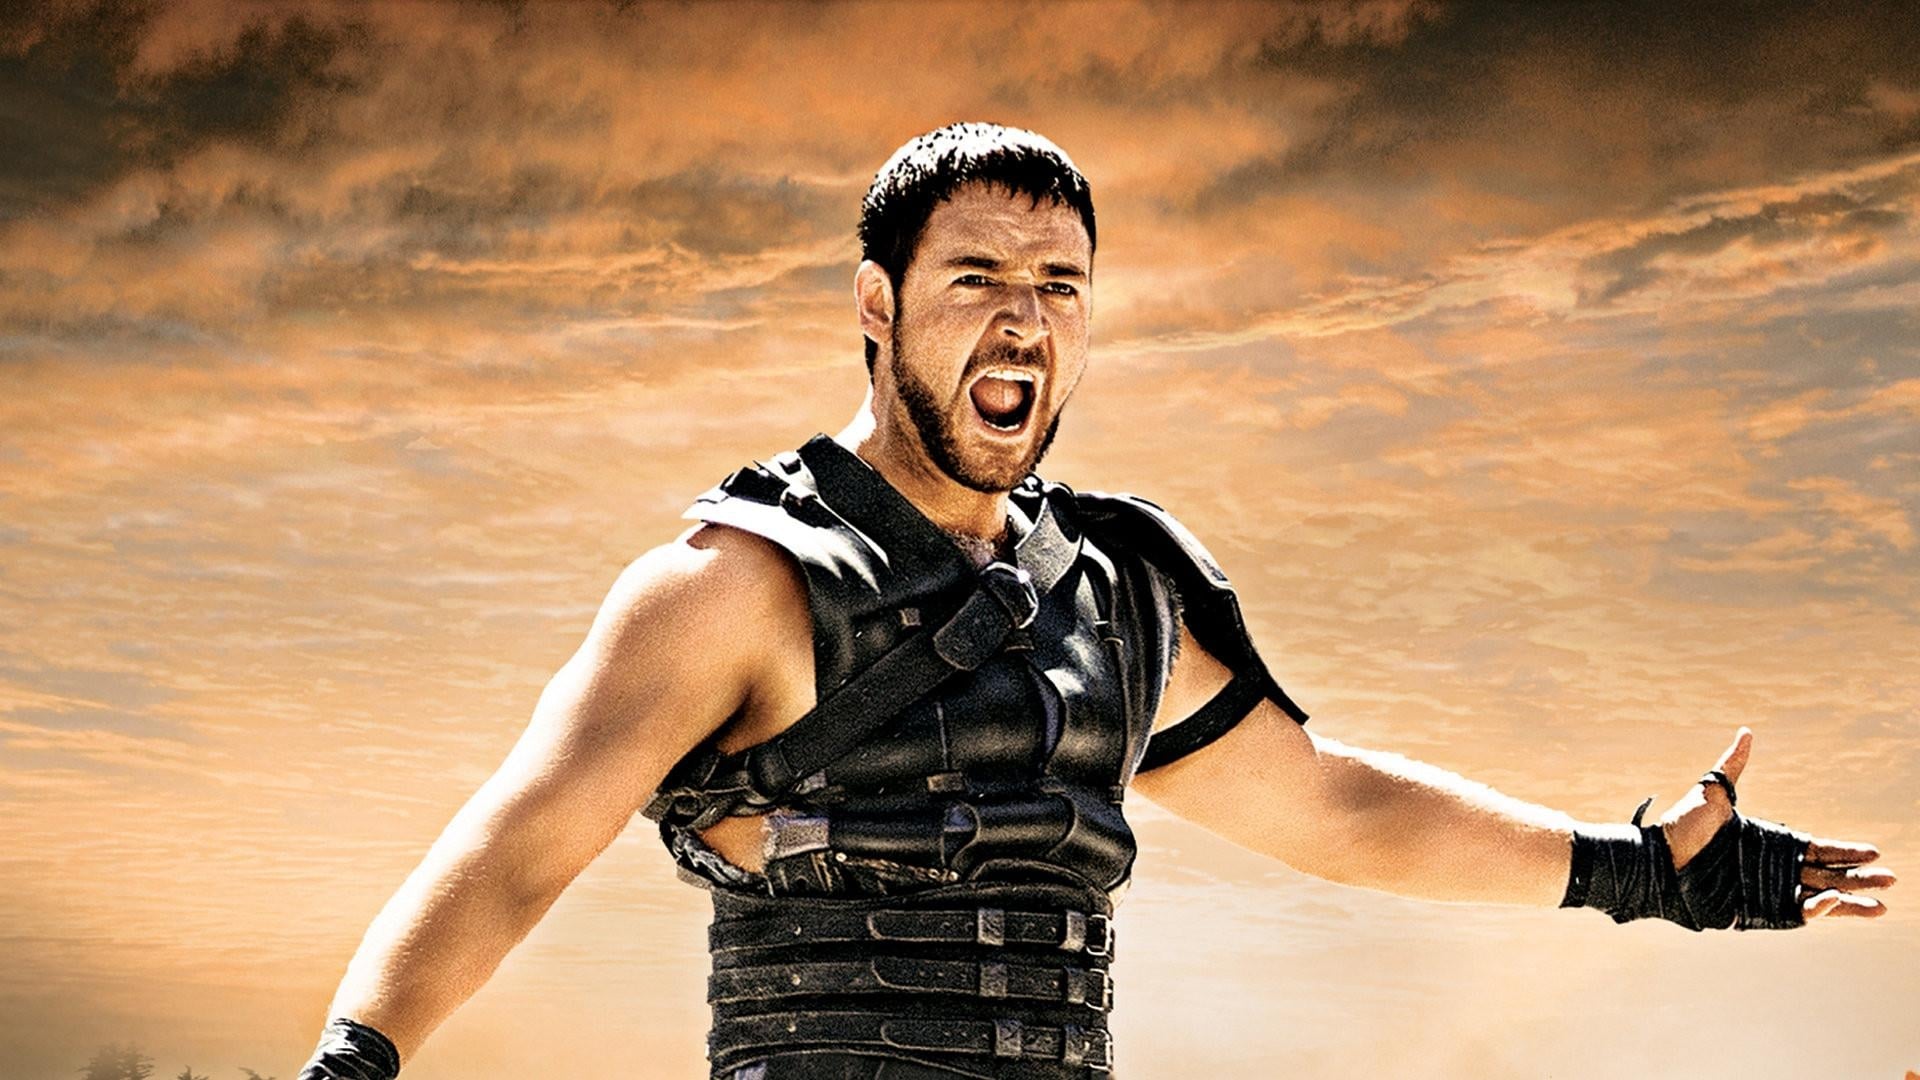 Russell Crowe on ‘Gladiator 2’: ‘I’m a little jealous’